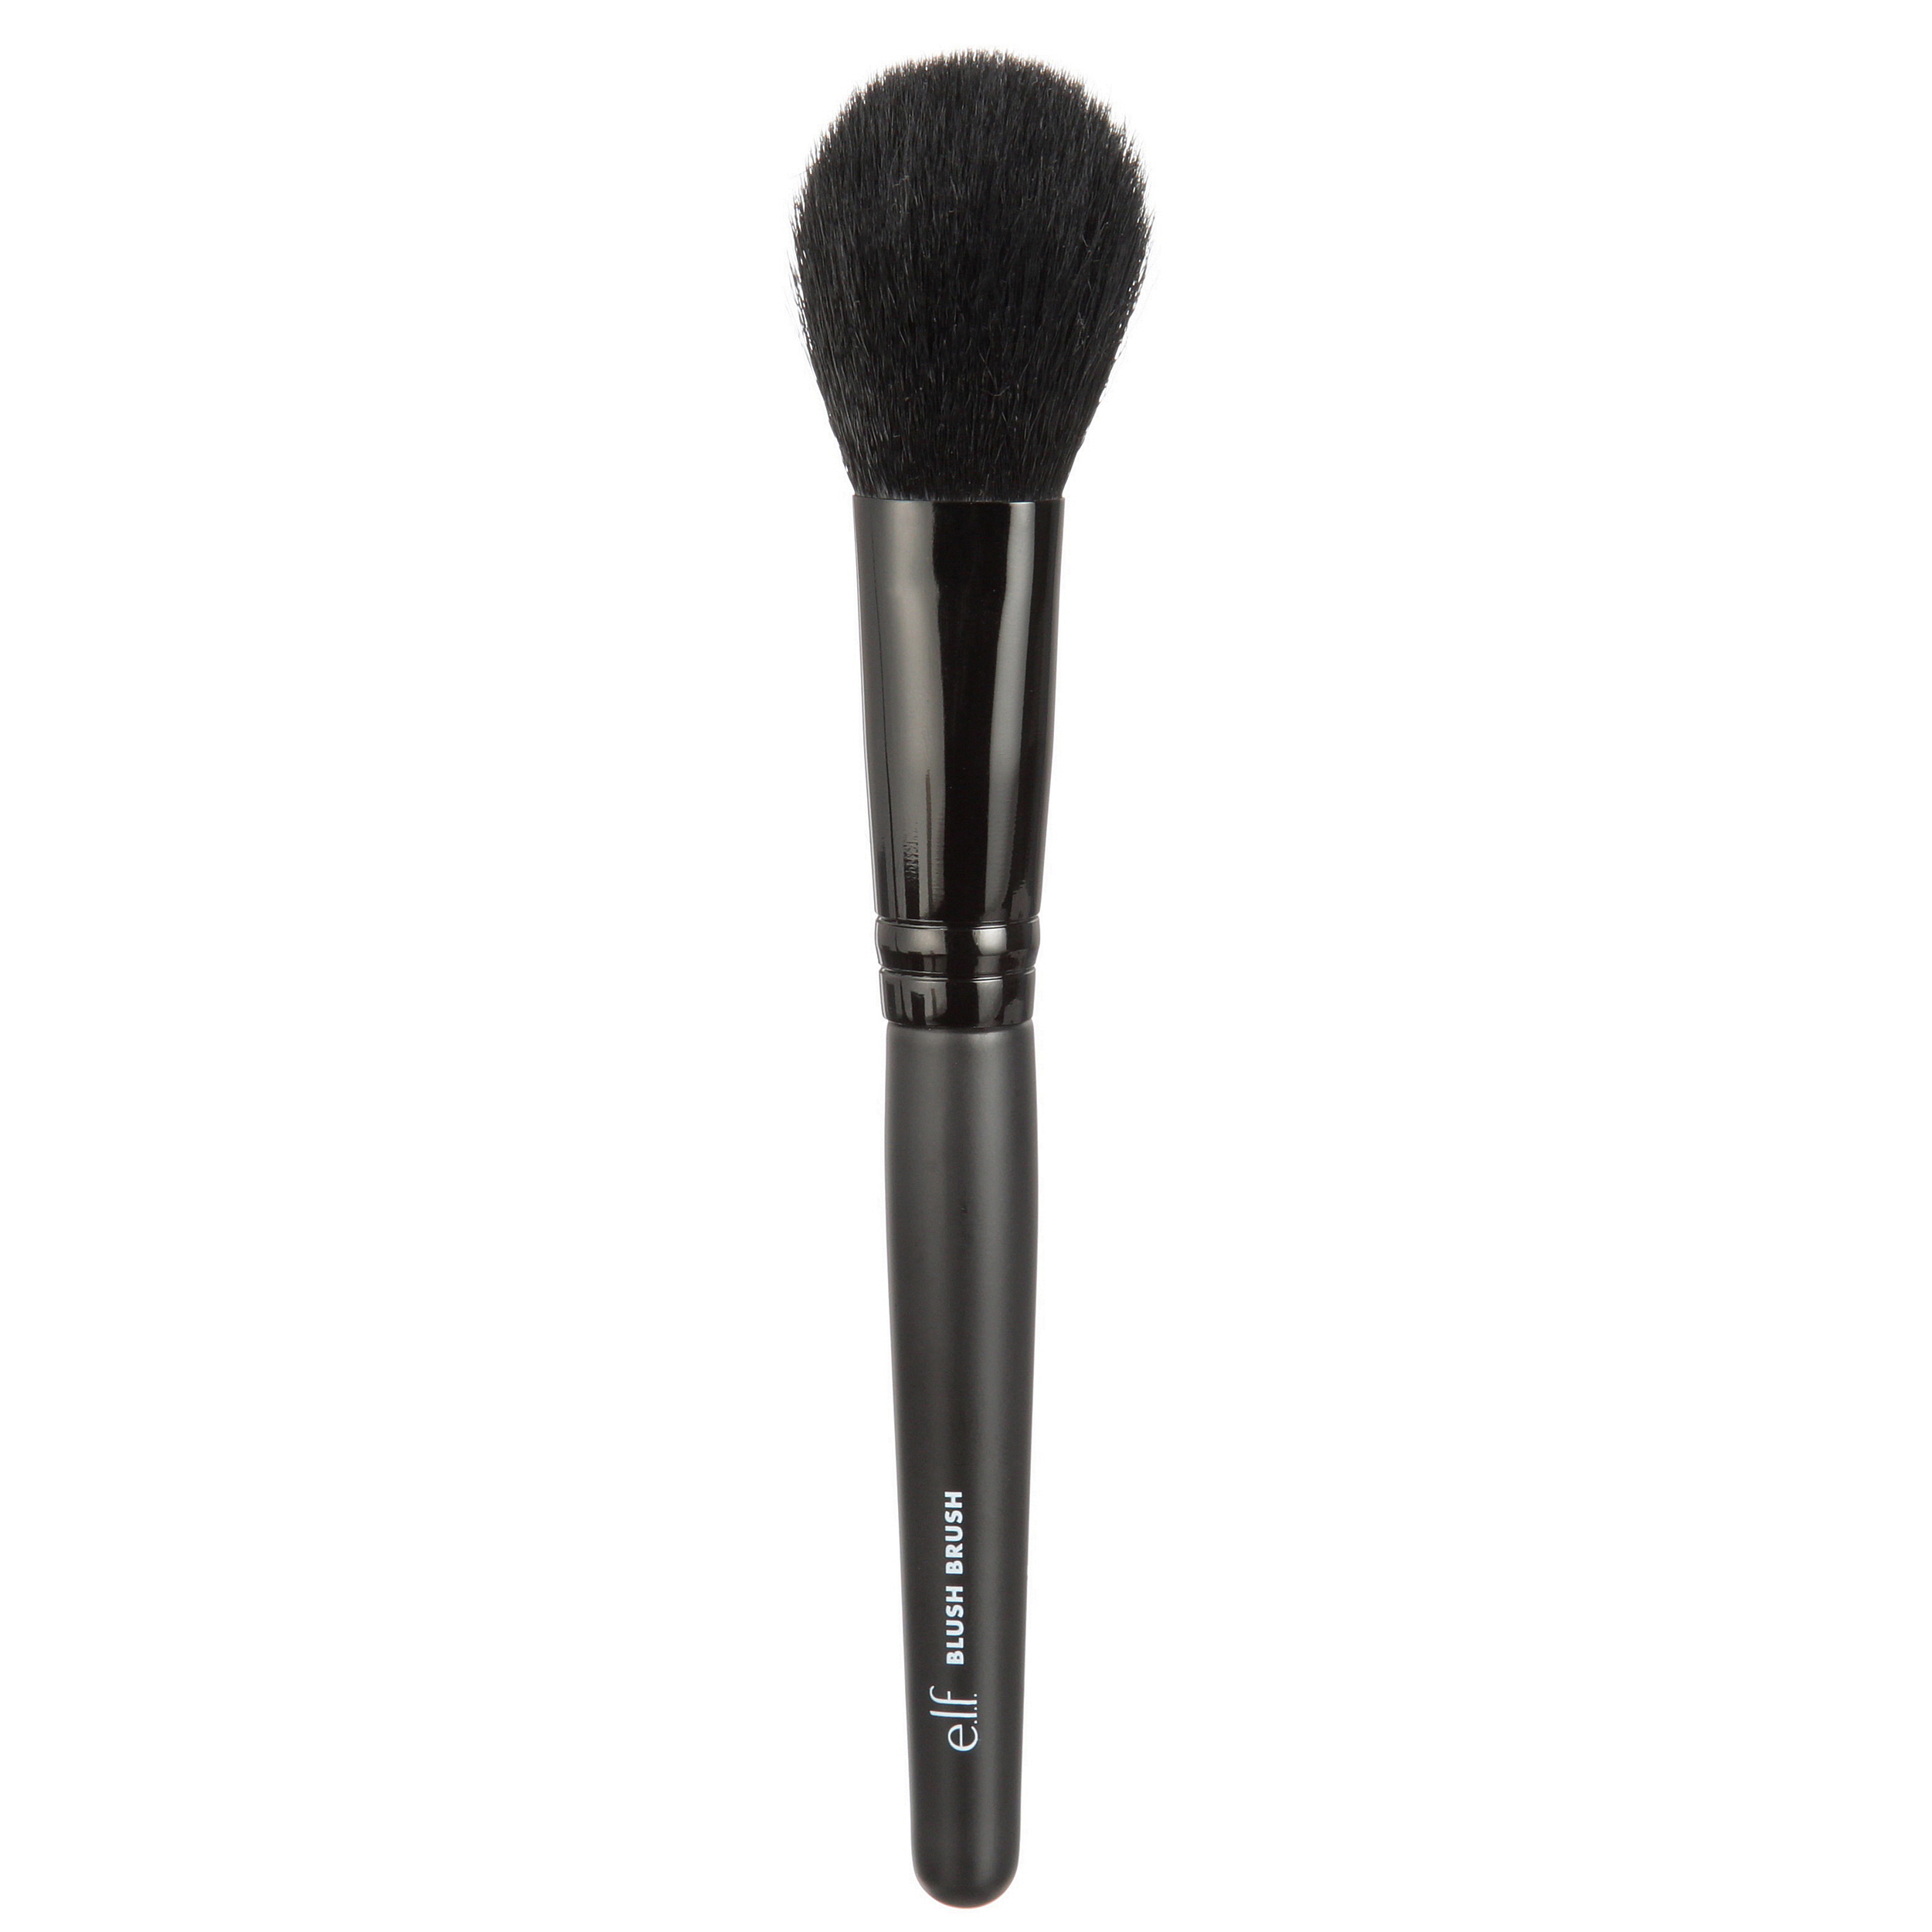 e.l.f Blush Brush for Precision Application, Synthetic - image 1 of 4